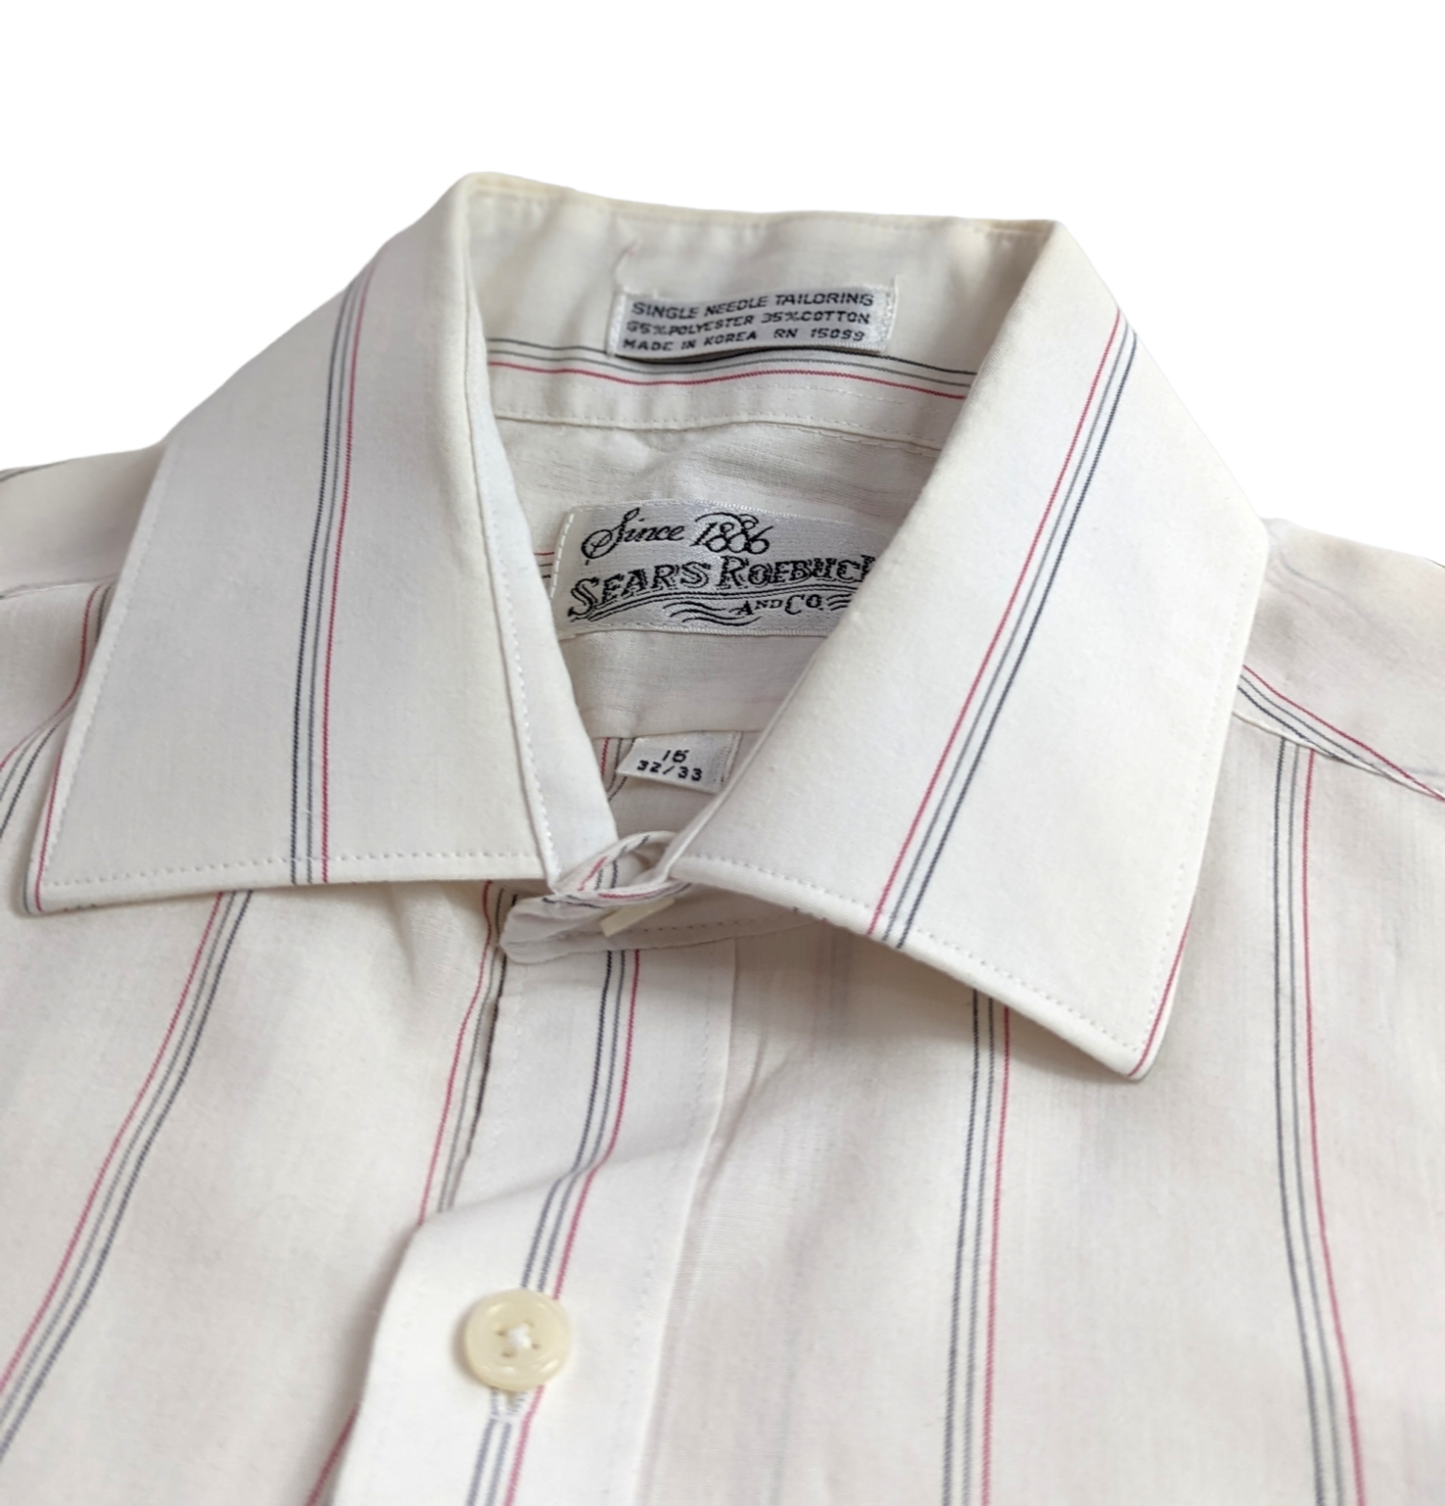 1960s Sears Roebuck and Co White Striped Long Sleeve Button Up Shirt